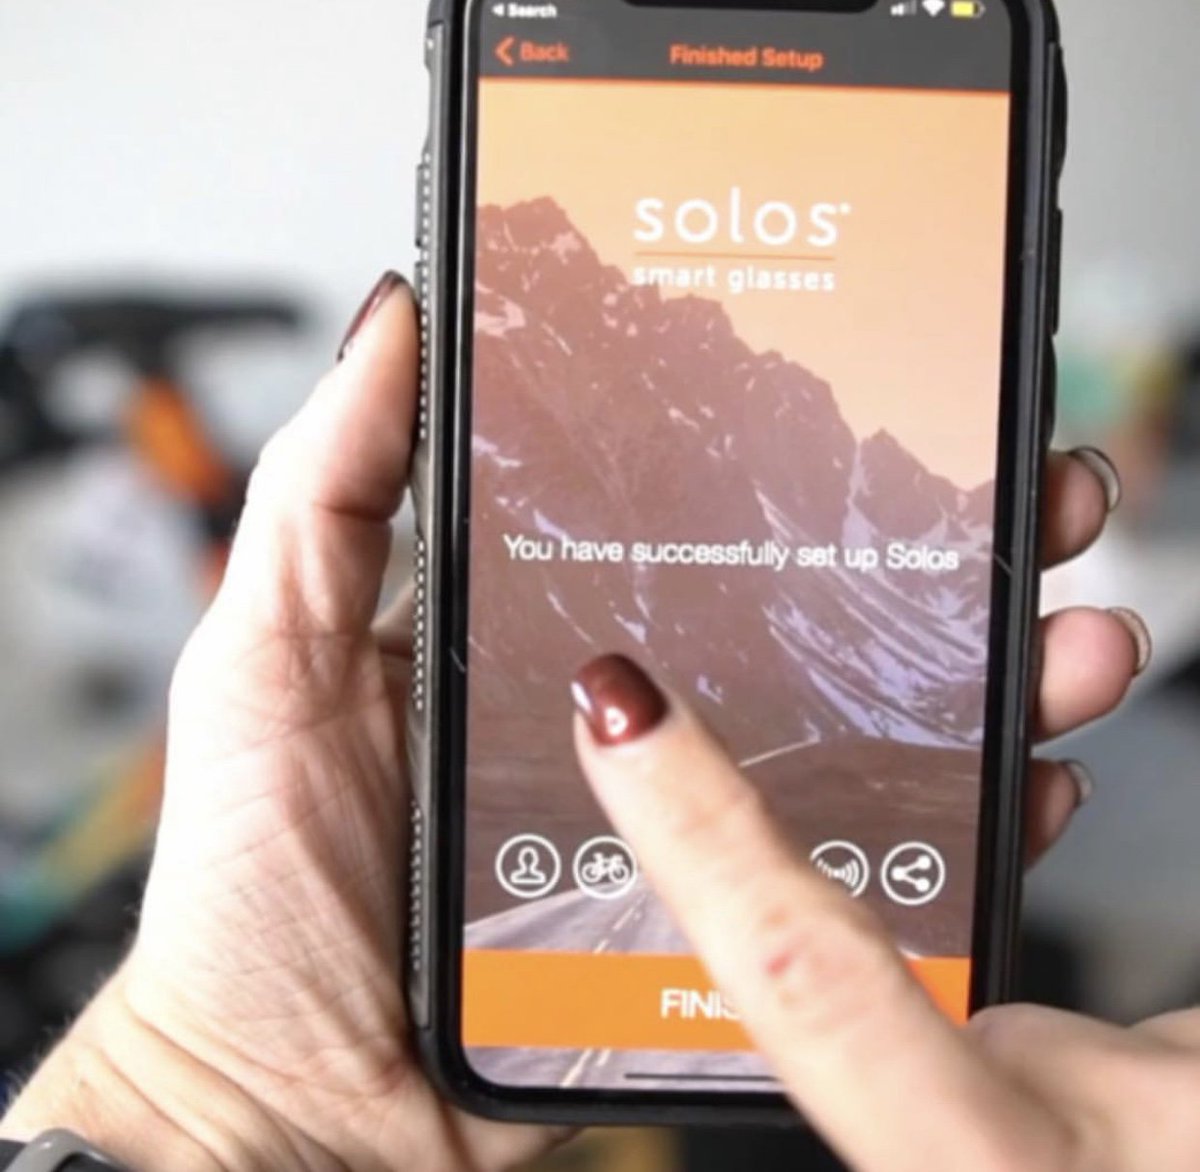 Training with Solos has never been so convenient! Solos connects to your Android phone or iPhone 📱, and can even connect to your Android Wear 2.0 smartwatch⌚️! You can connect your favorite sensors too via Bluetooth Low Energy 🔋and ANT+.